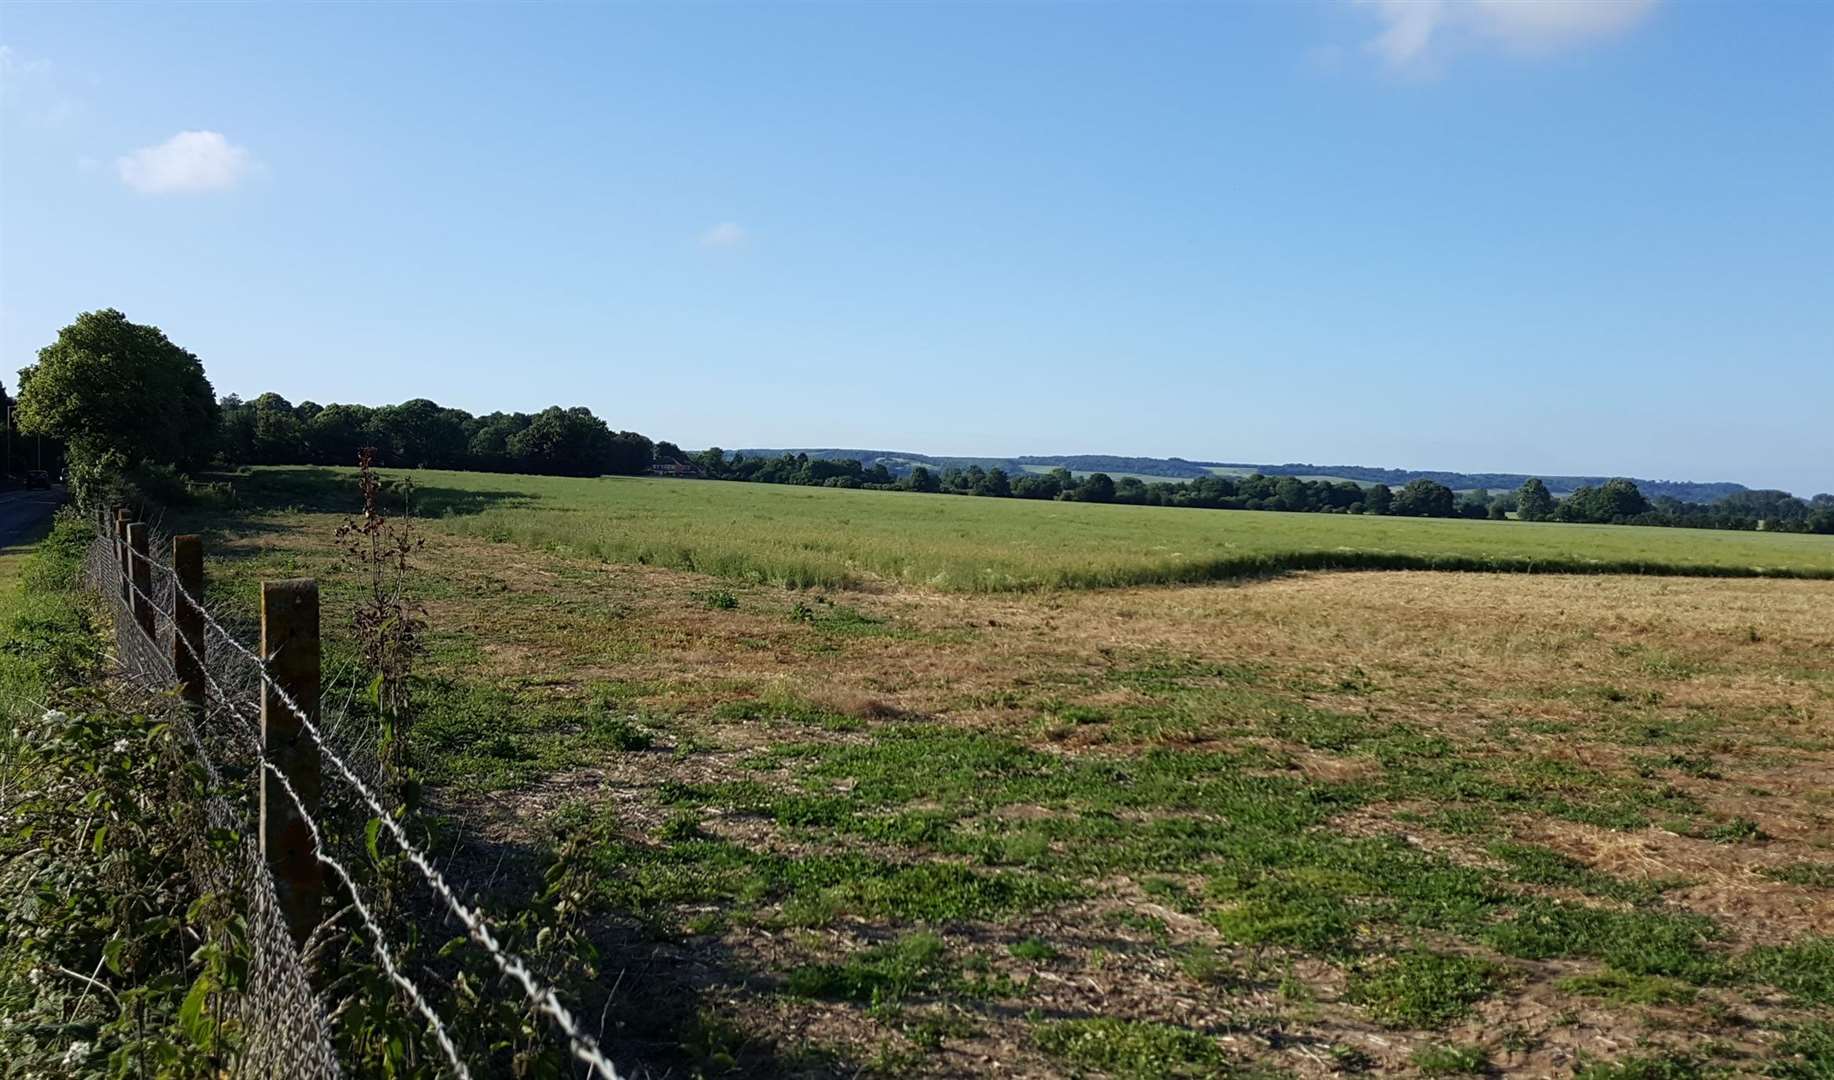 Fields off Willesborough Road have been earmarked for 750 homes